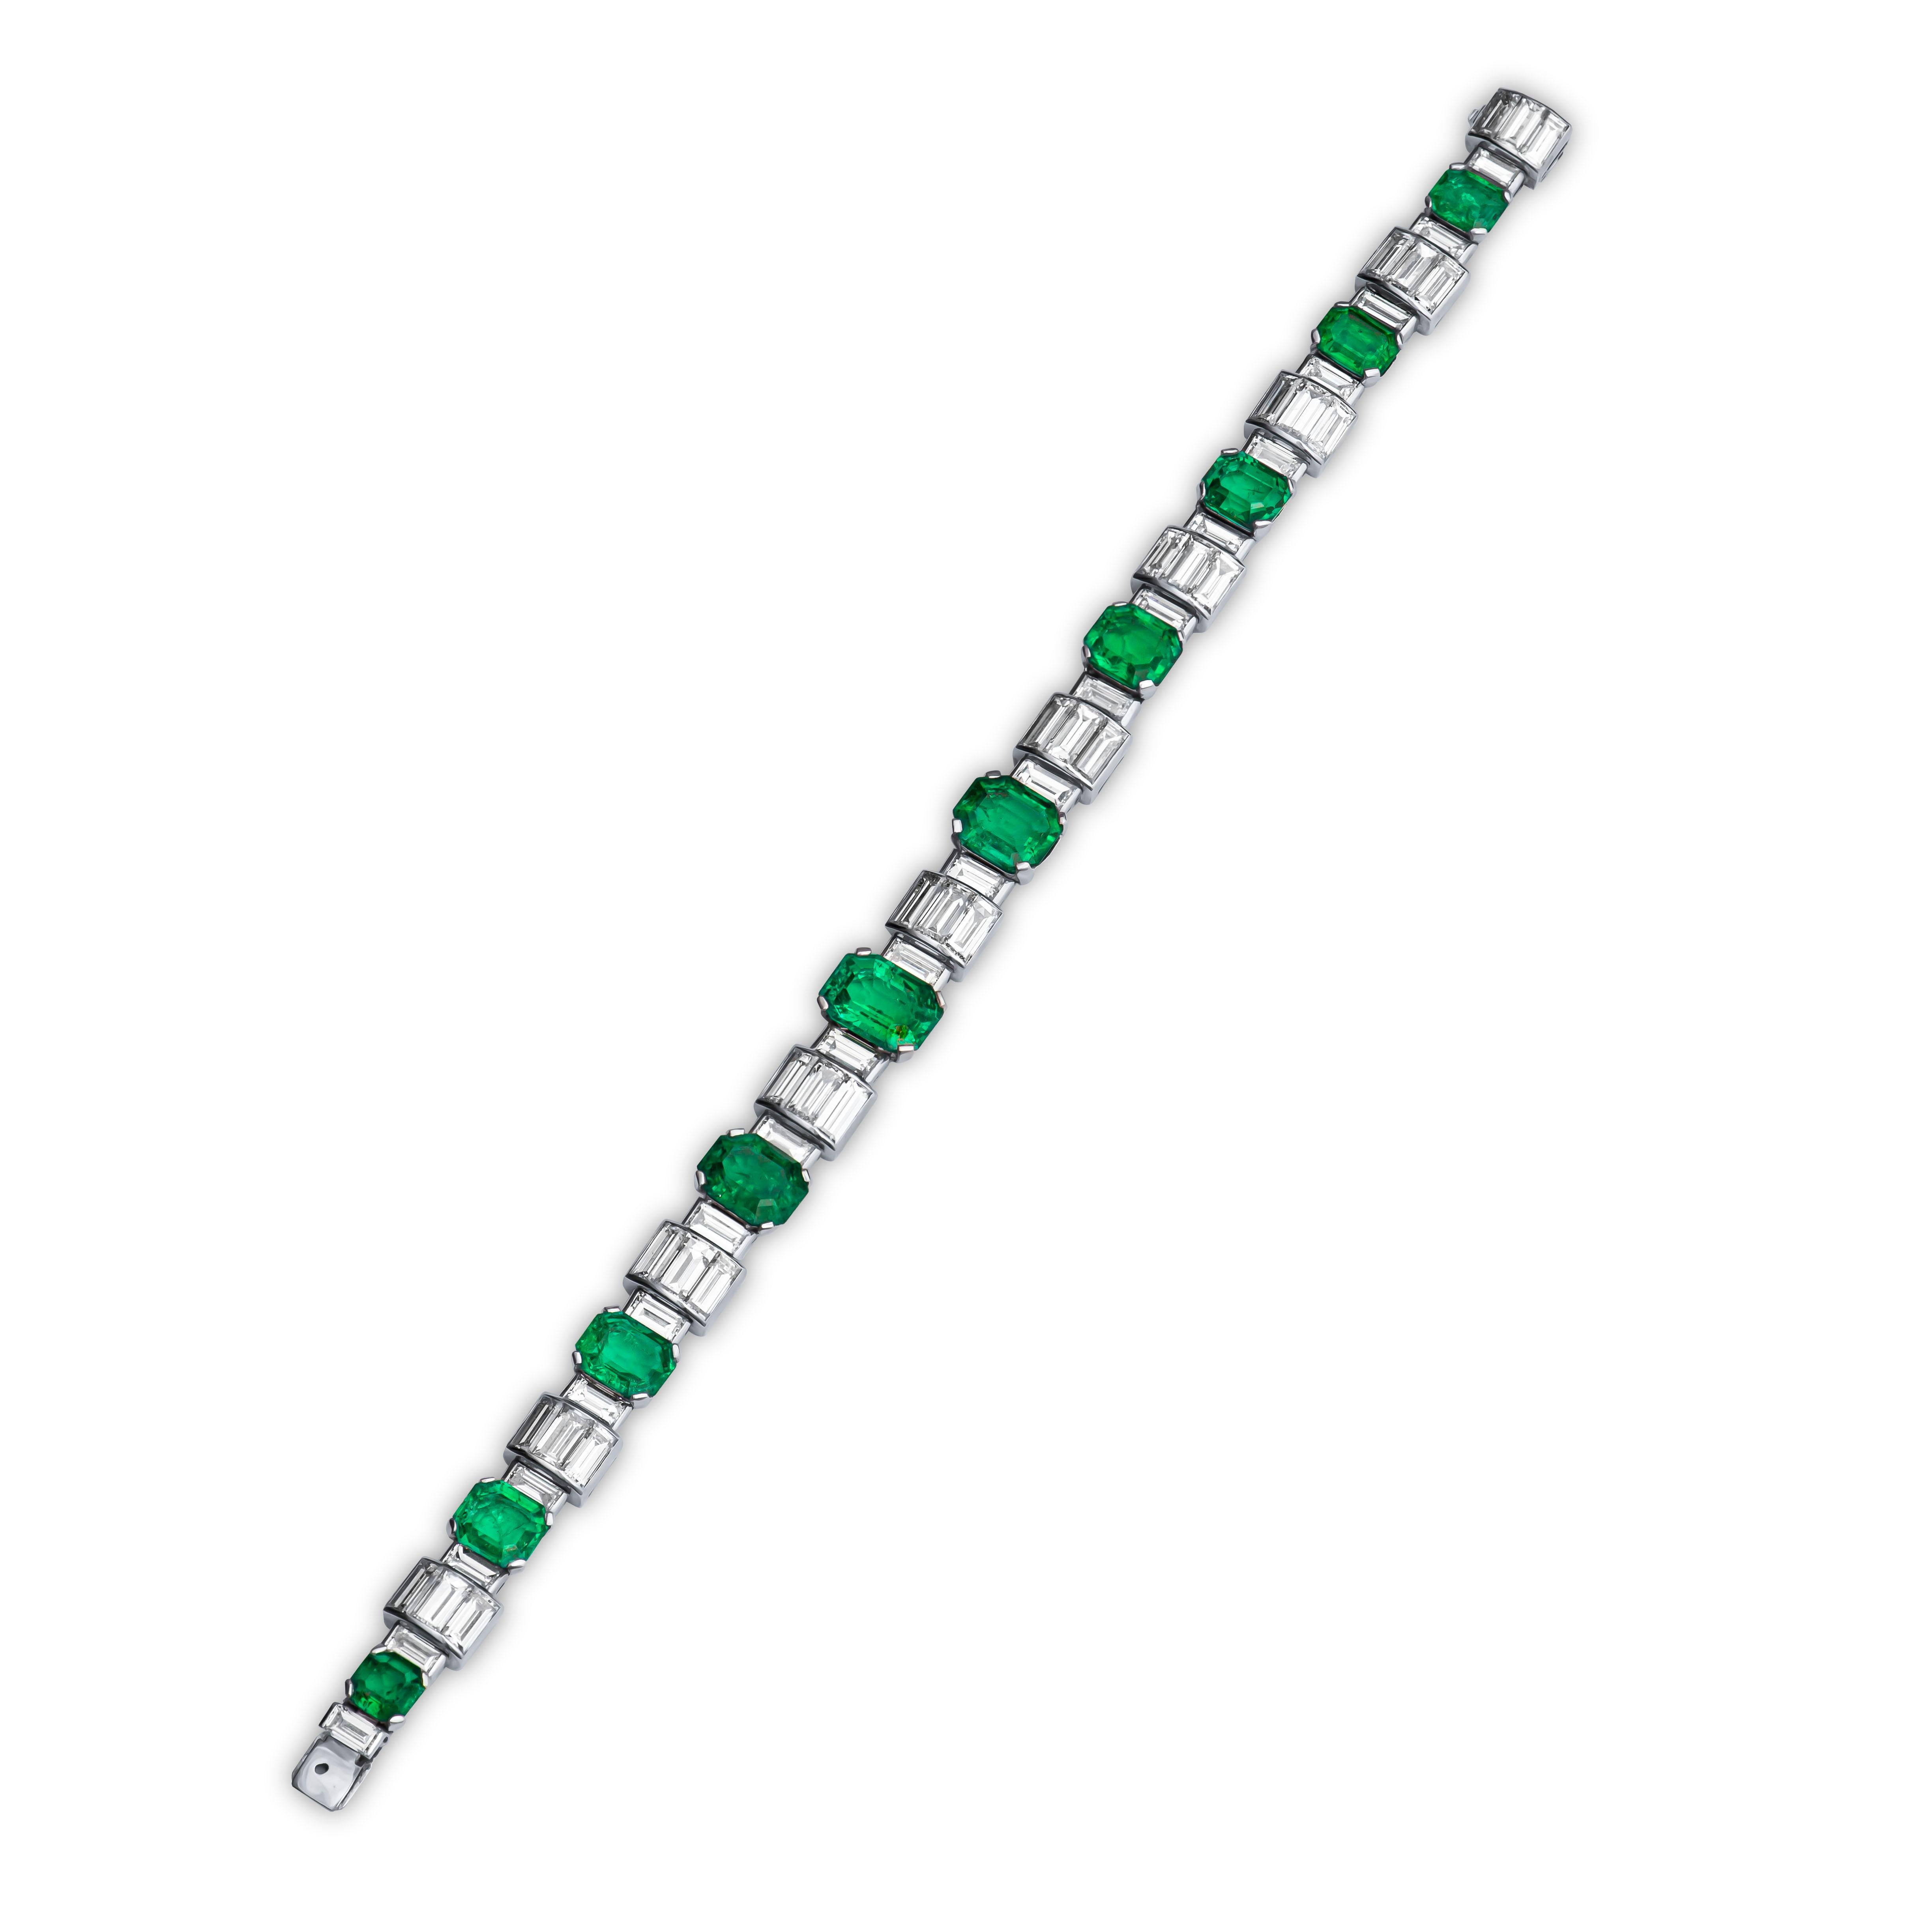 Exceptionally beautiful one-of-a-kind handmade vintage emerald and diamond bracelet that showcases 13.42 carats total of fine, richly saturated and clean natural Colombian emeralds with approximately 18.75 carats total of Collection Quality baguette